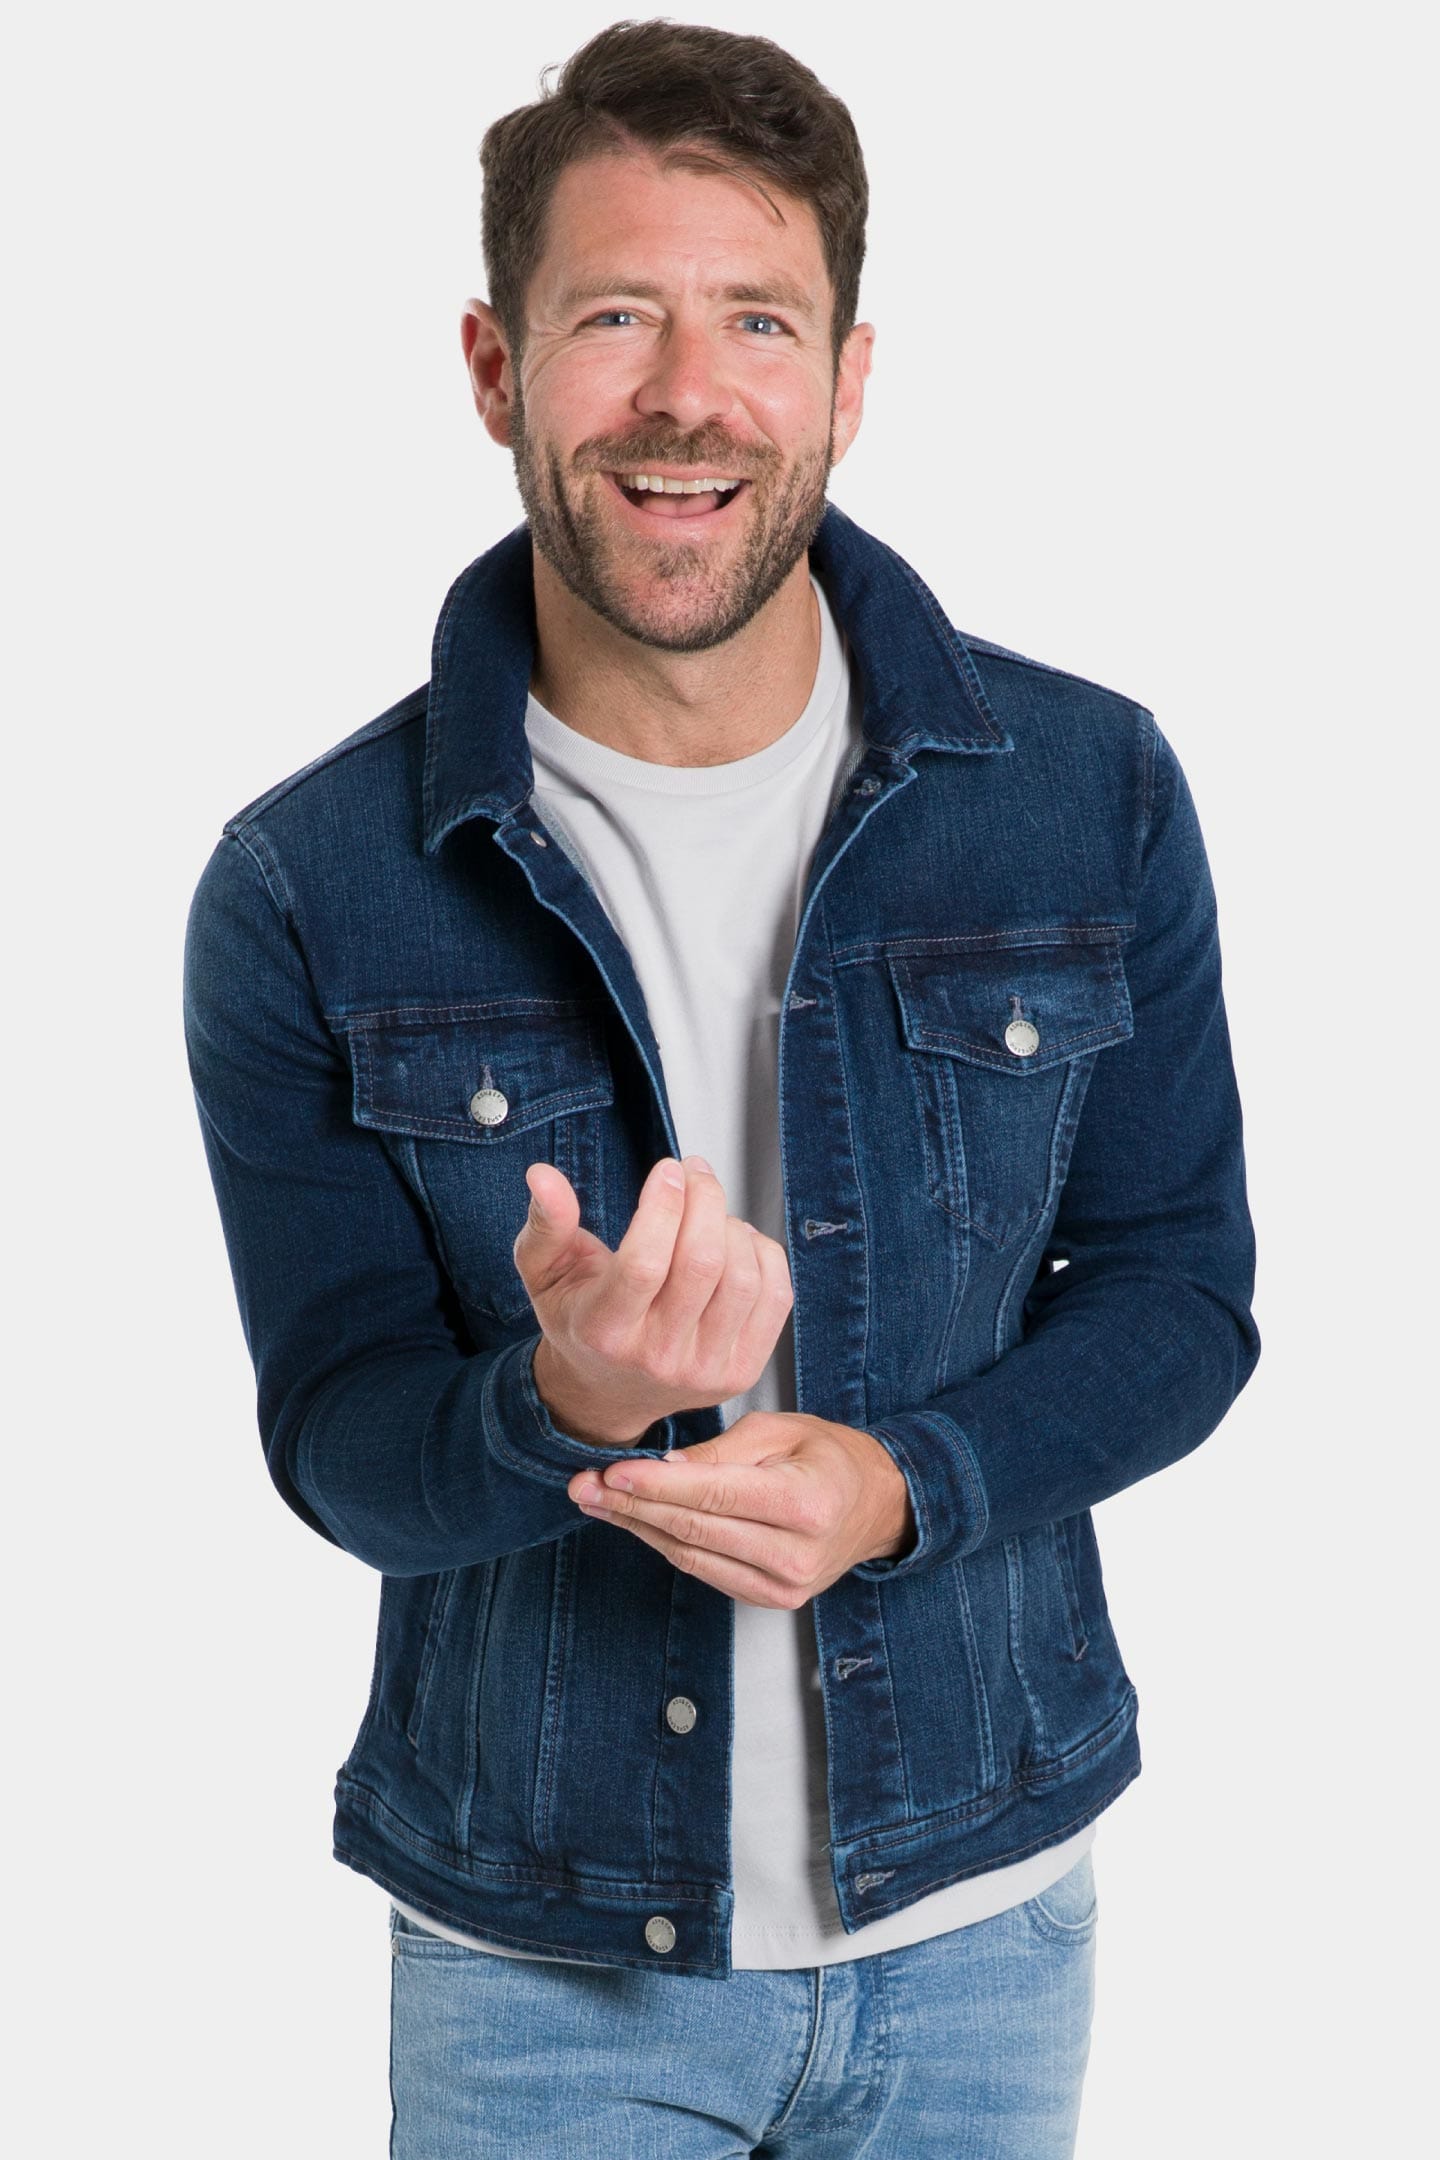 The New Rules Of Double Denim | FashionBeans | Leather jacket outfit men,  Jean jacket outfits men, Blue jean jacket outfits